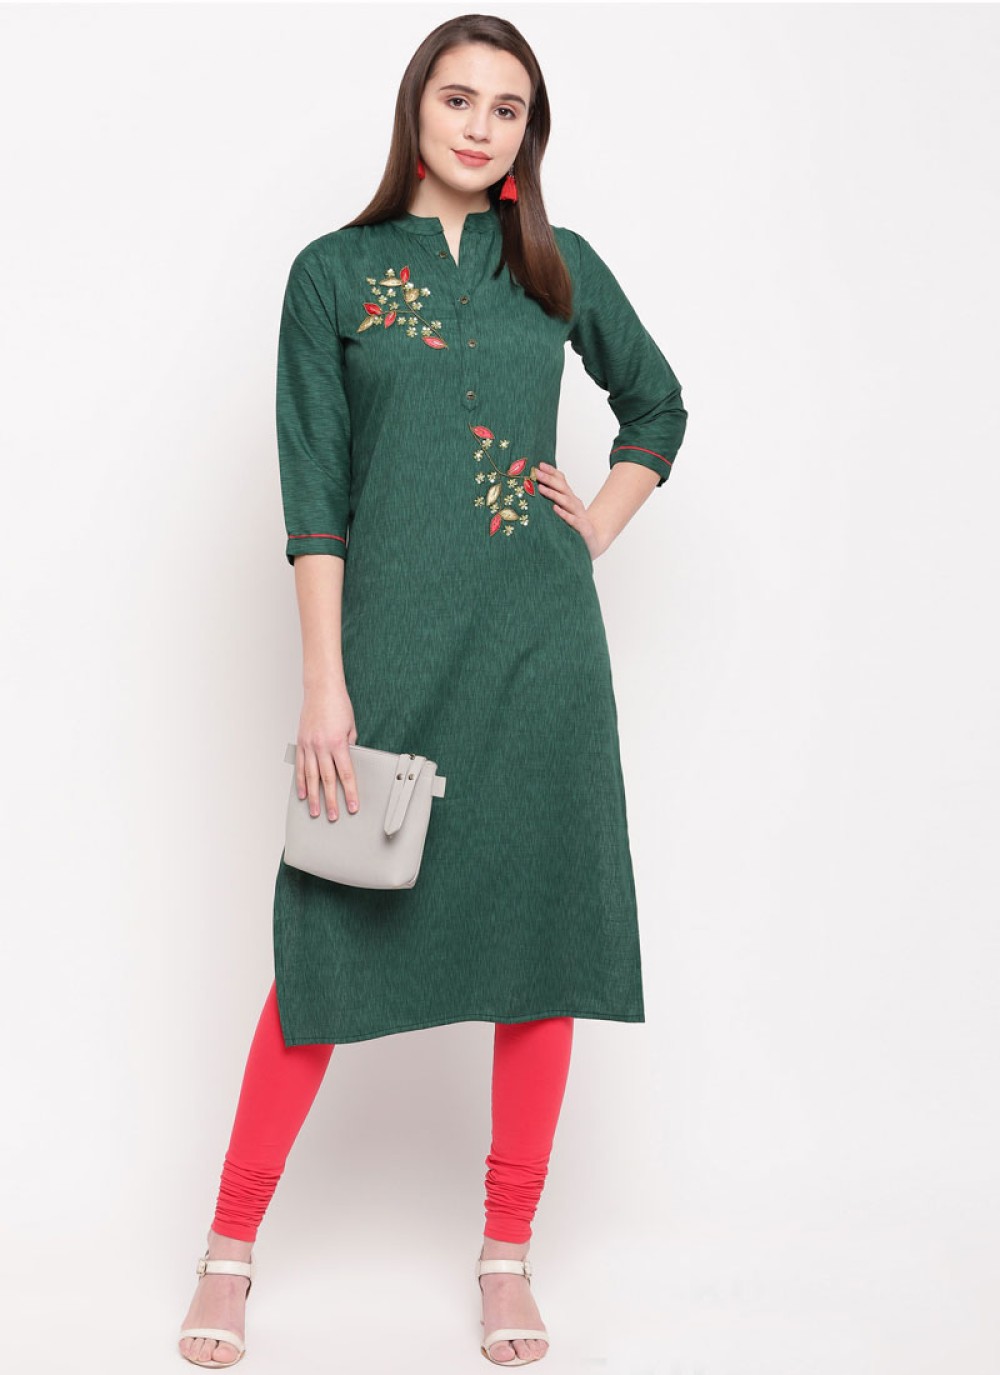 ItsKrishnaStore Featuring Solid Reyon Dress with finely curated Sifli Work  Kurti This is made for simple casual dressing with subtle -  agrohort.ipb.ac.id